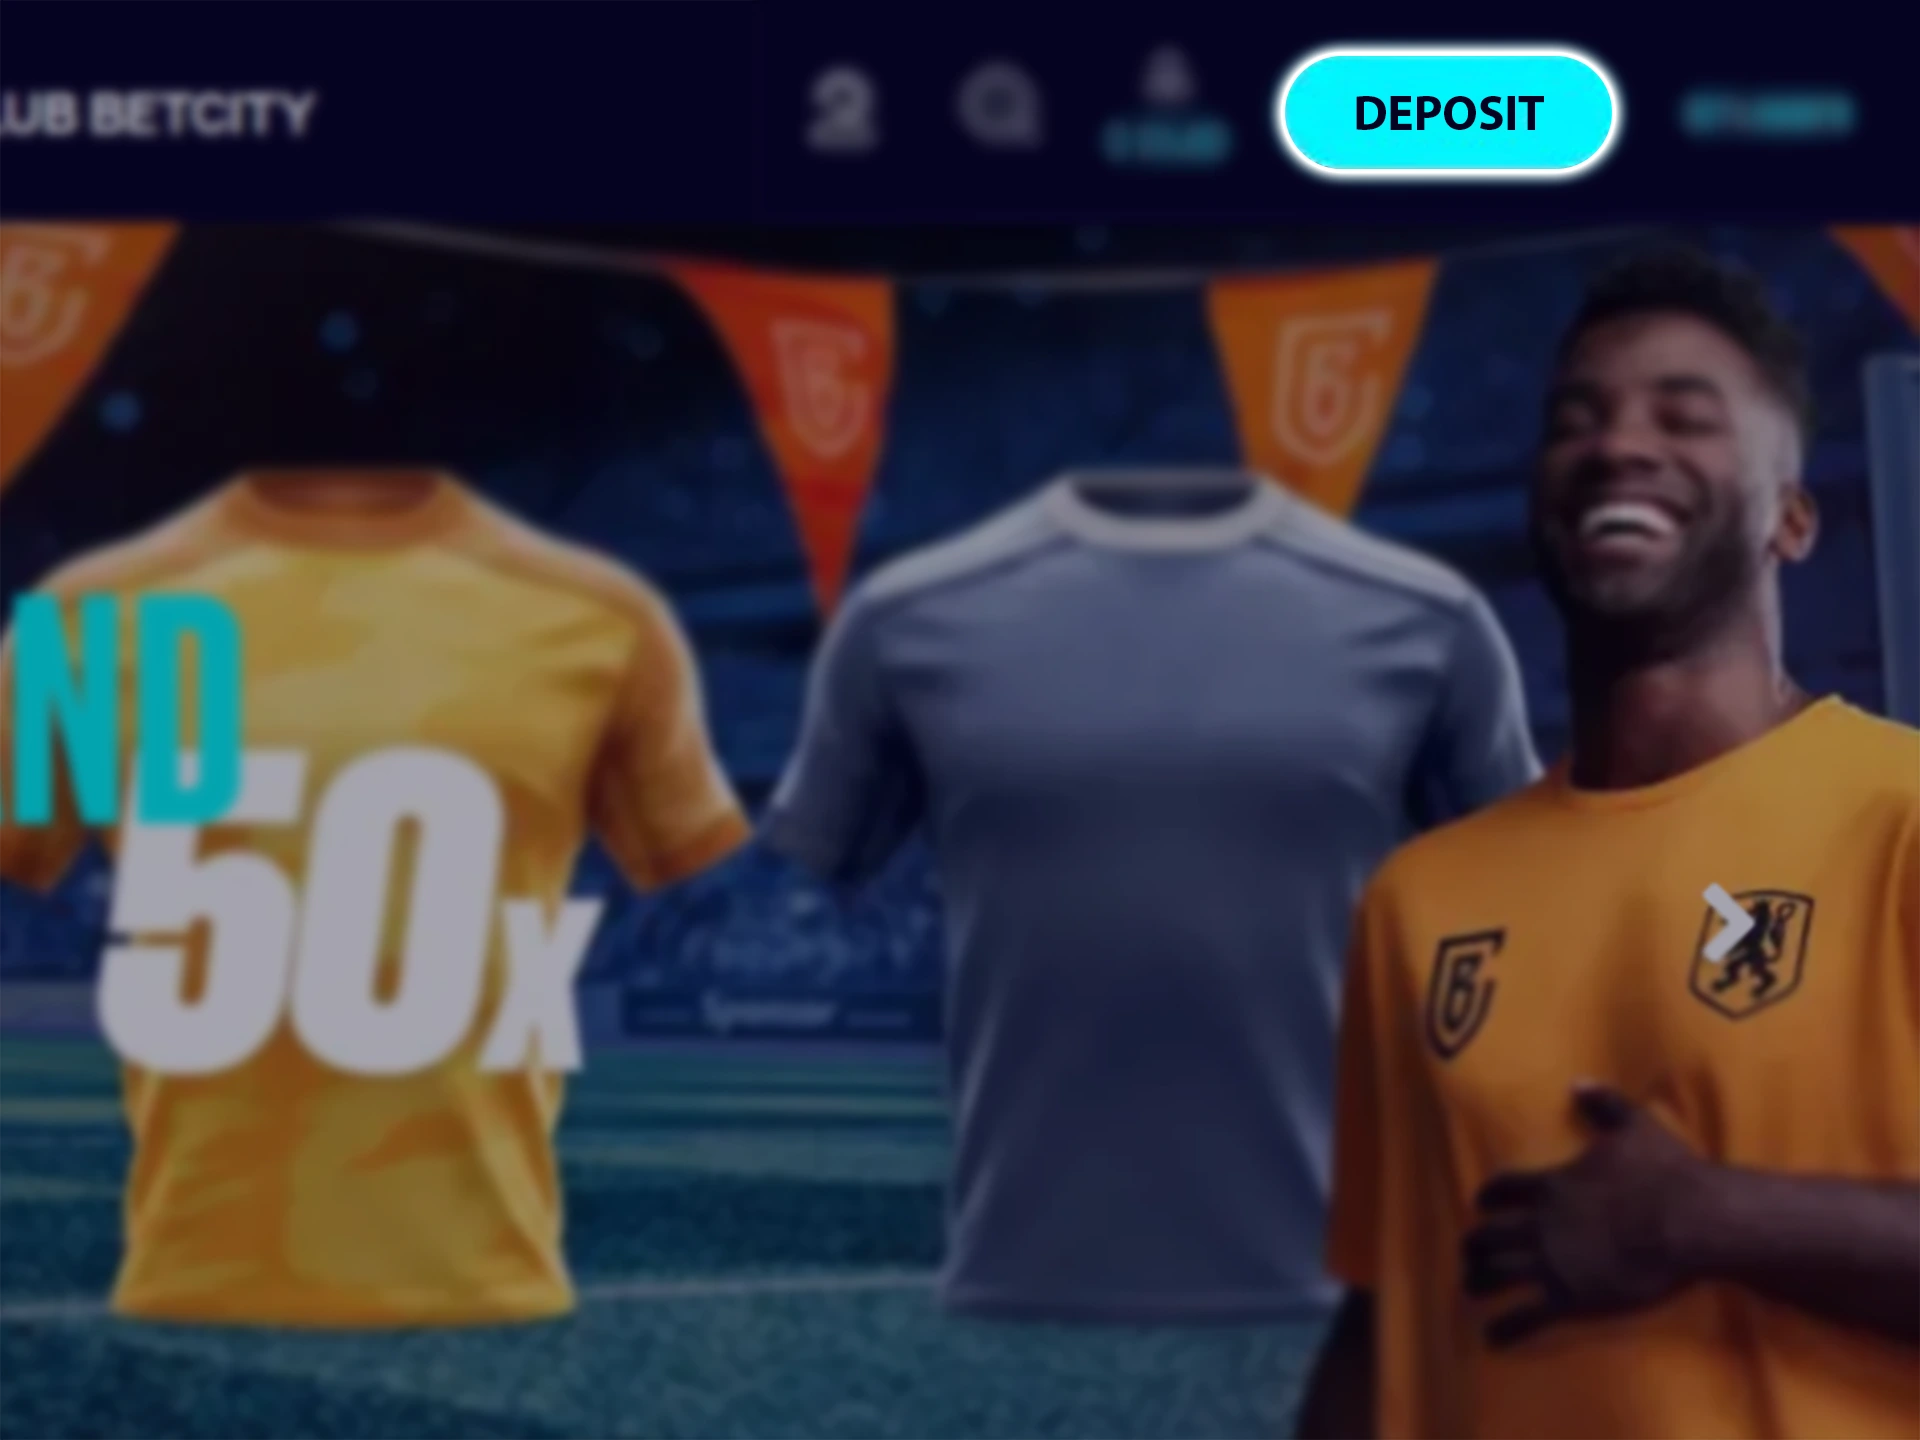 Click the button to open the Betcity deposit window.